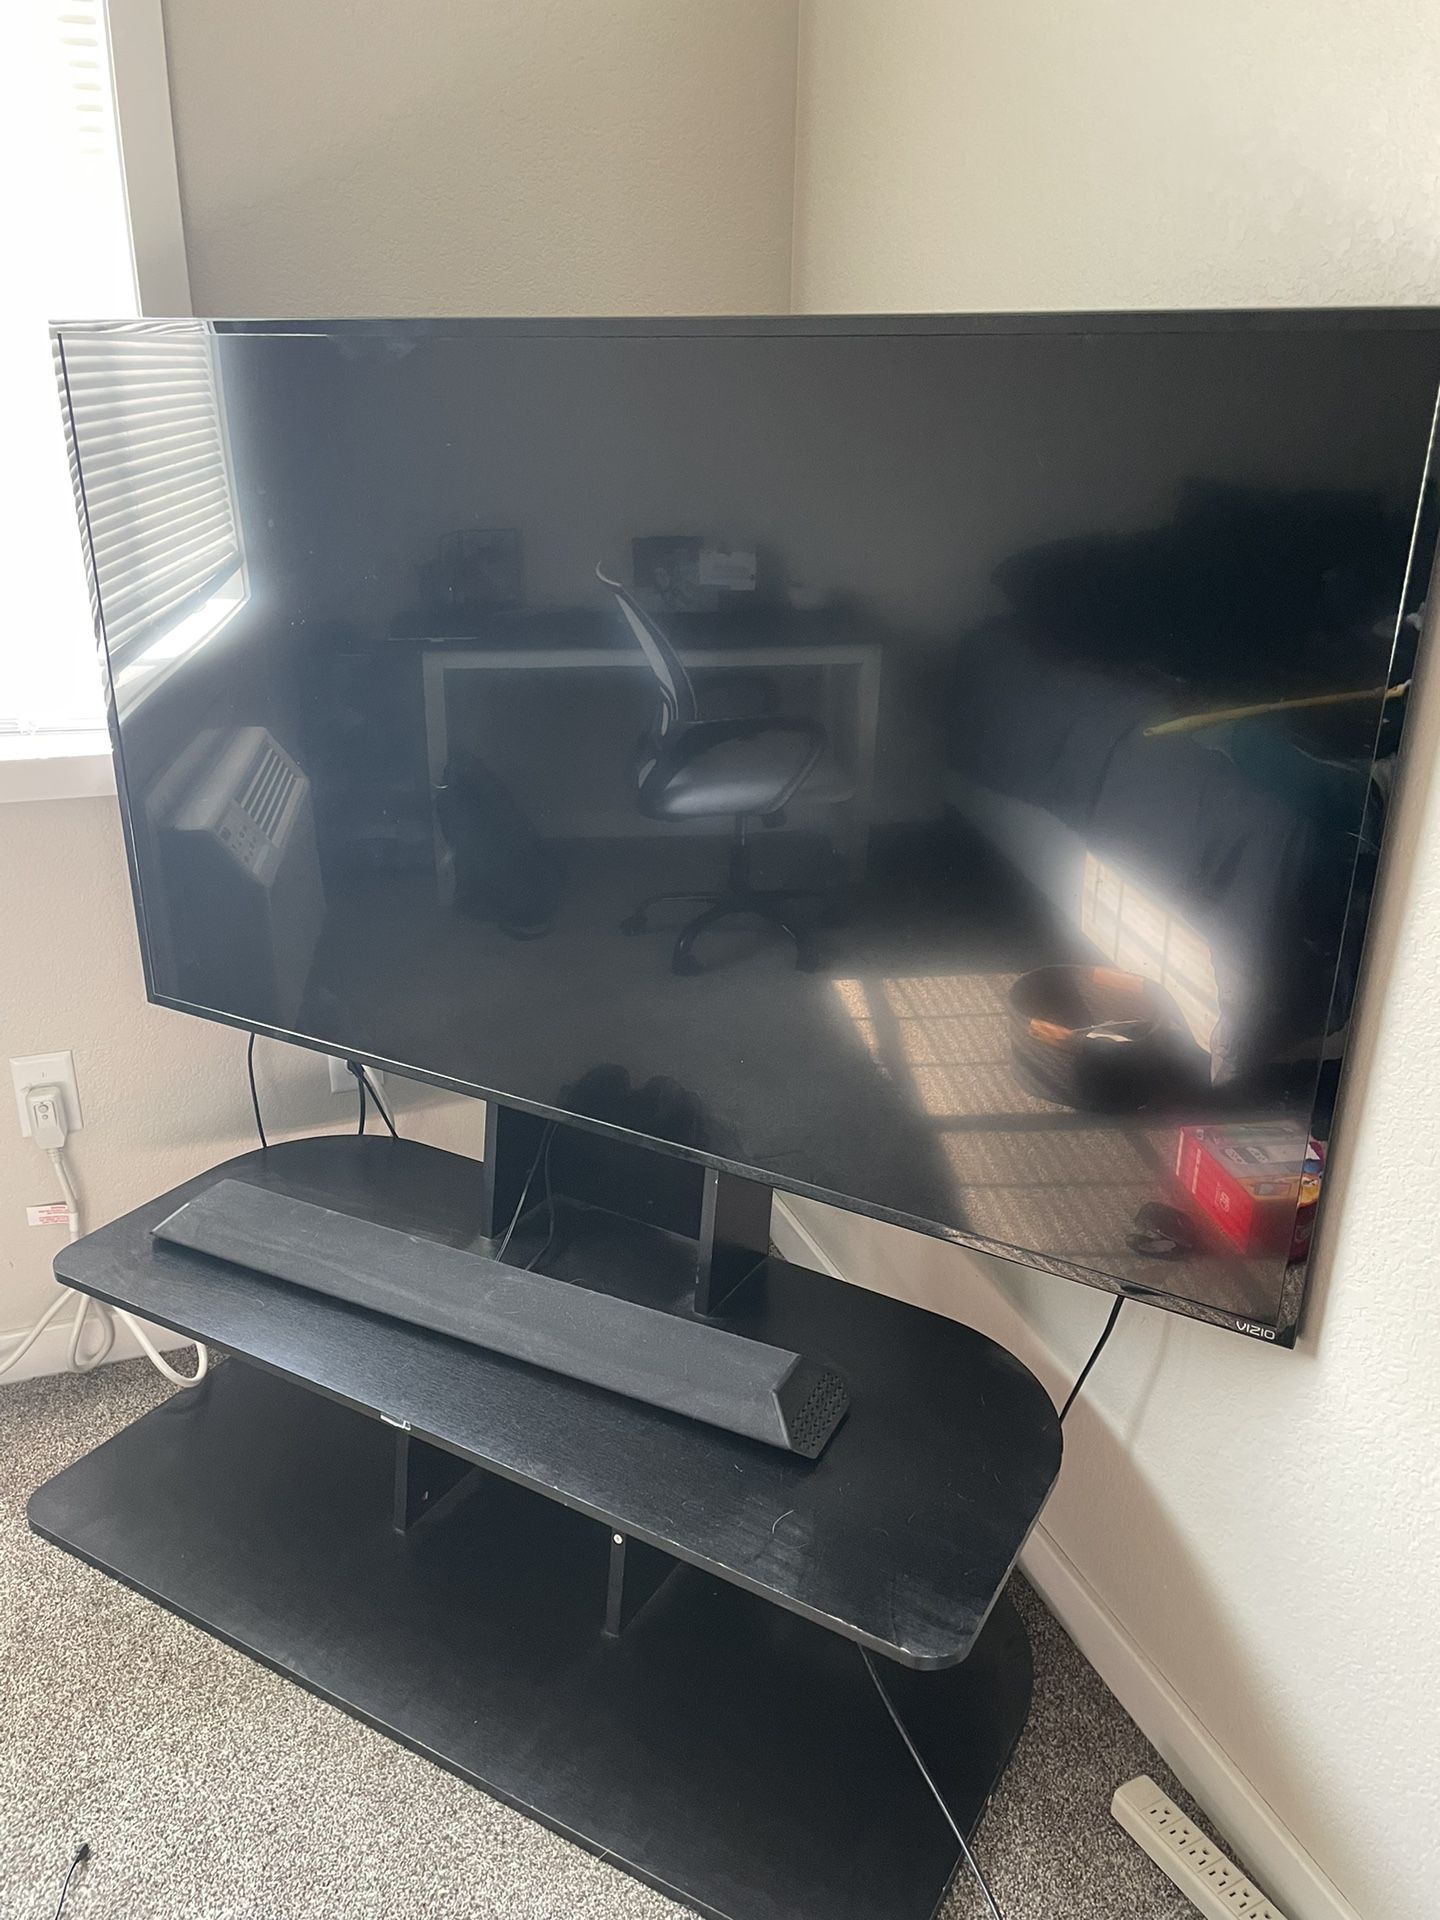 TV  Stand 